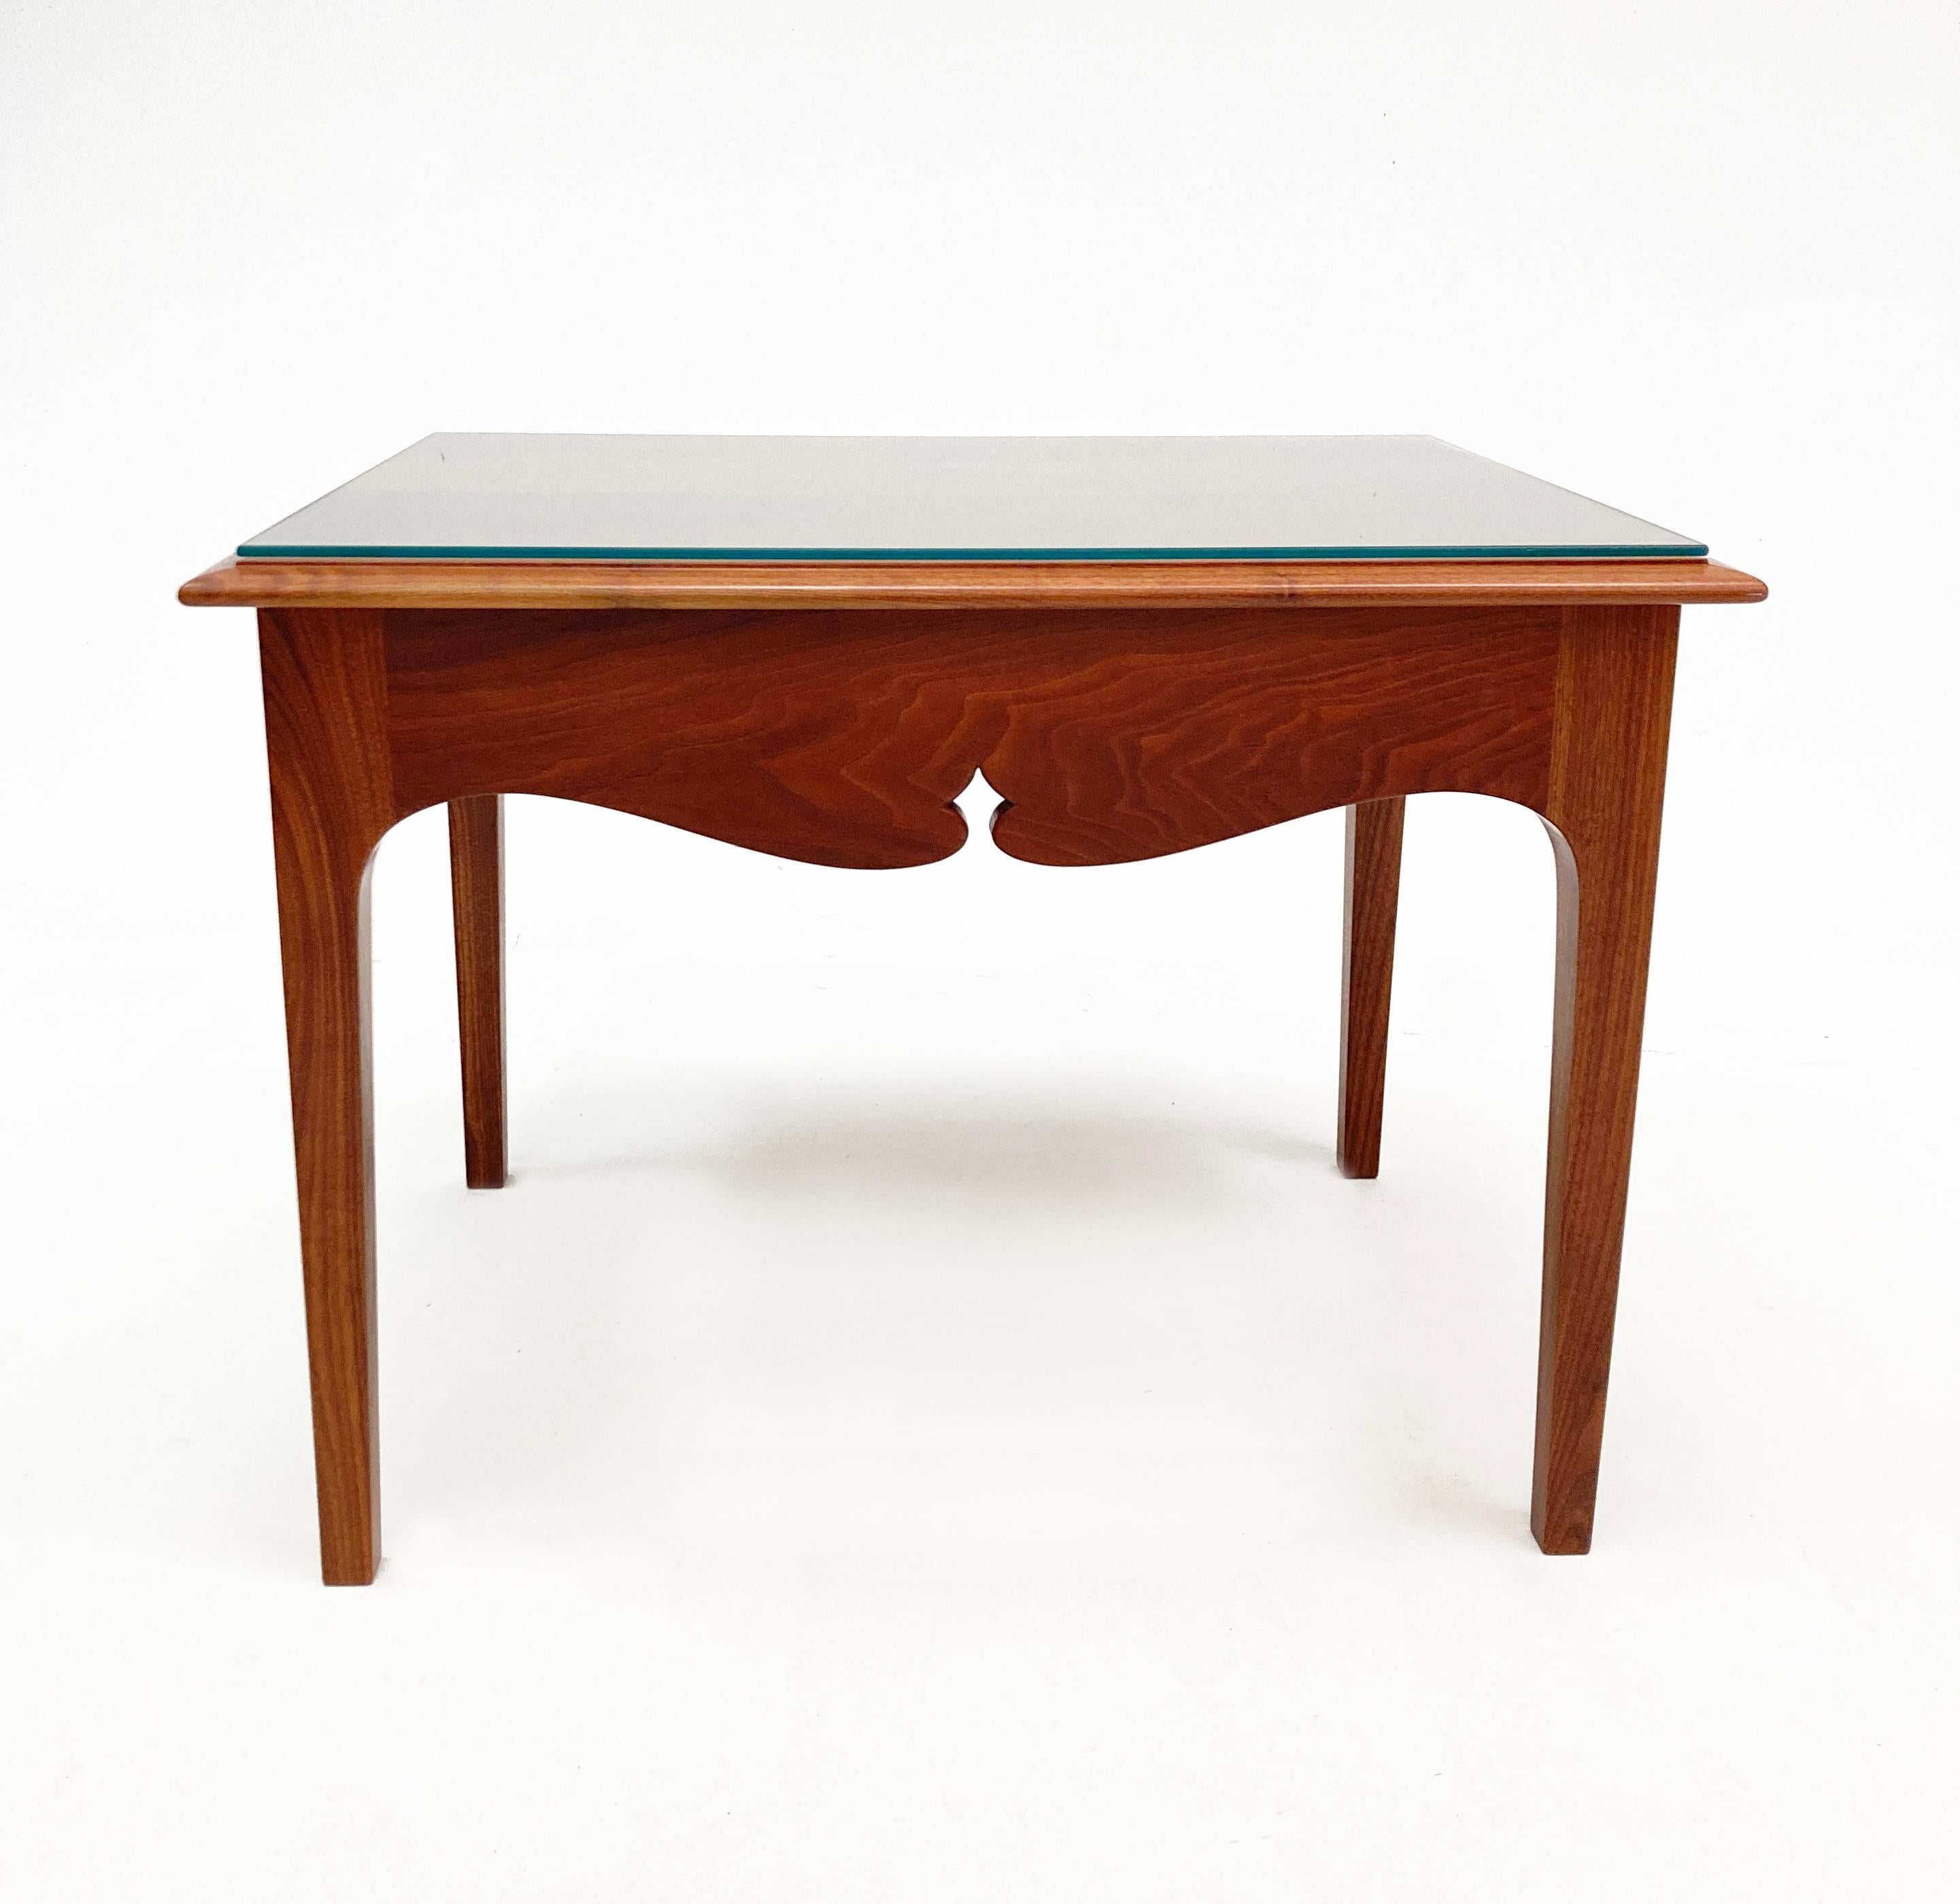 This stunning Kentucky hand-crafted walnut table is perhaps the most perfectly crafted and finished piece of furniture we’ve laid hands on. Every inch, exposed and otherwise are beautifully and impeccably finished and smooth as silk. The skirt is